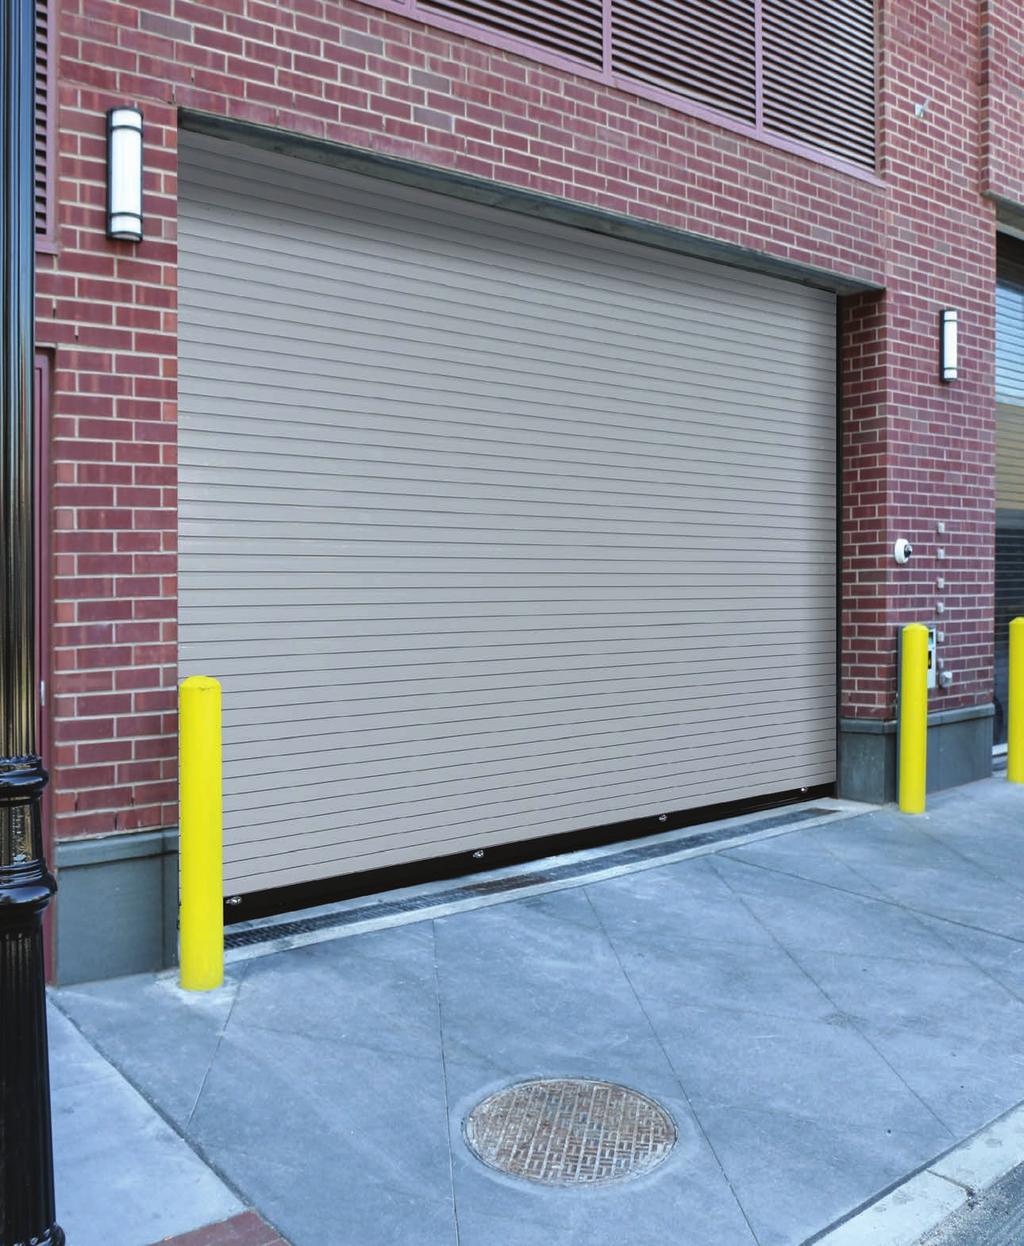 EVERSERVE MODEL 610S SPRINGLESS SERVICE DOORS EVERSERVE MODEL 610S is well suited for applications that require the security and performance of a rolling service door with the added benefits of